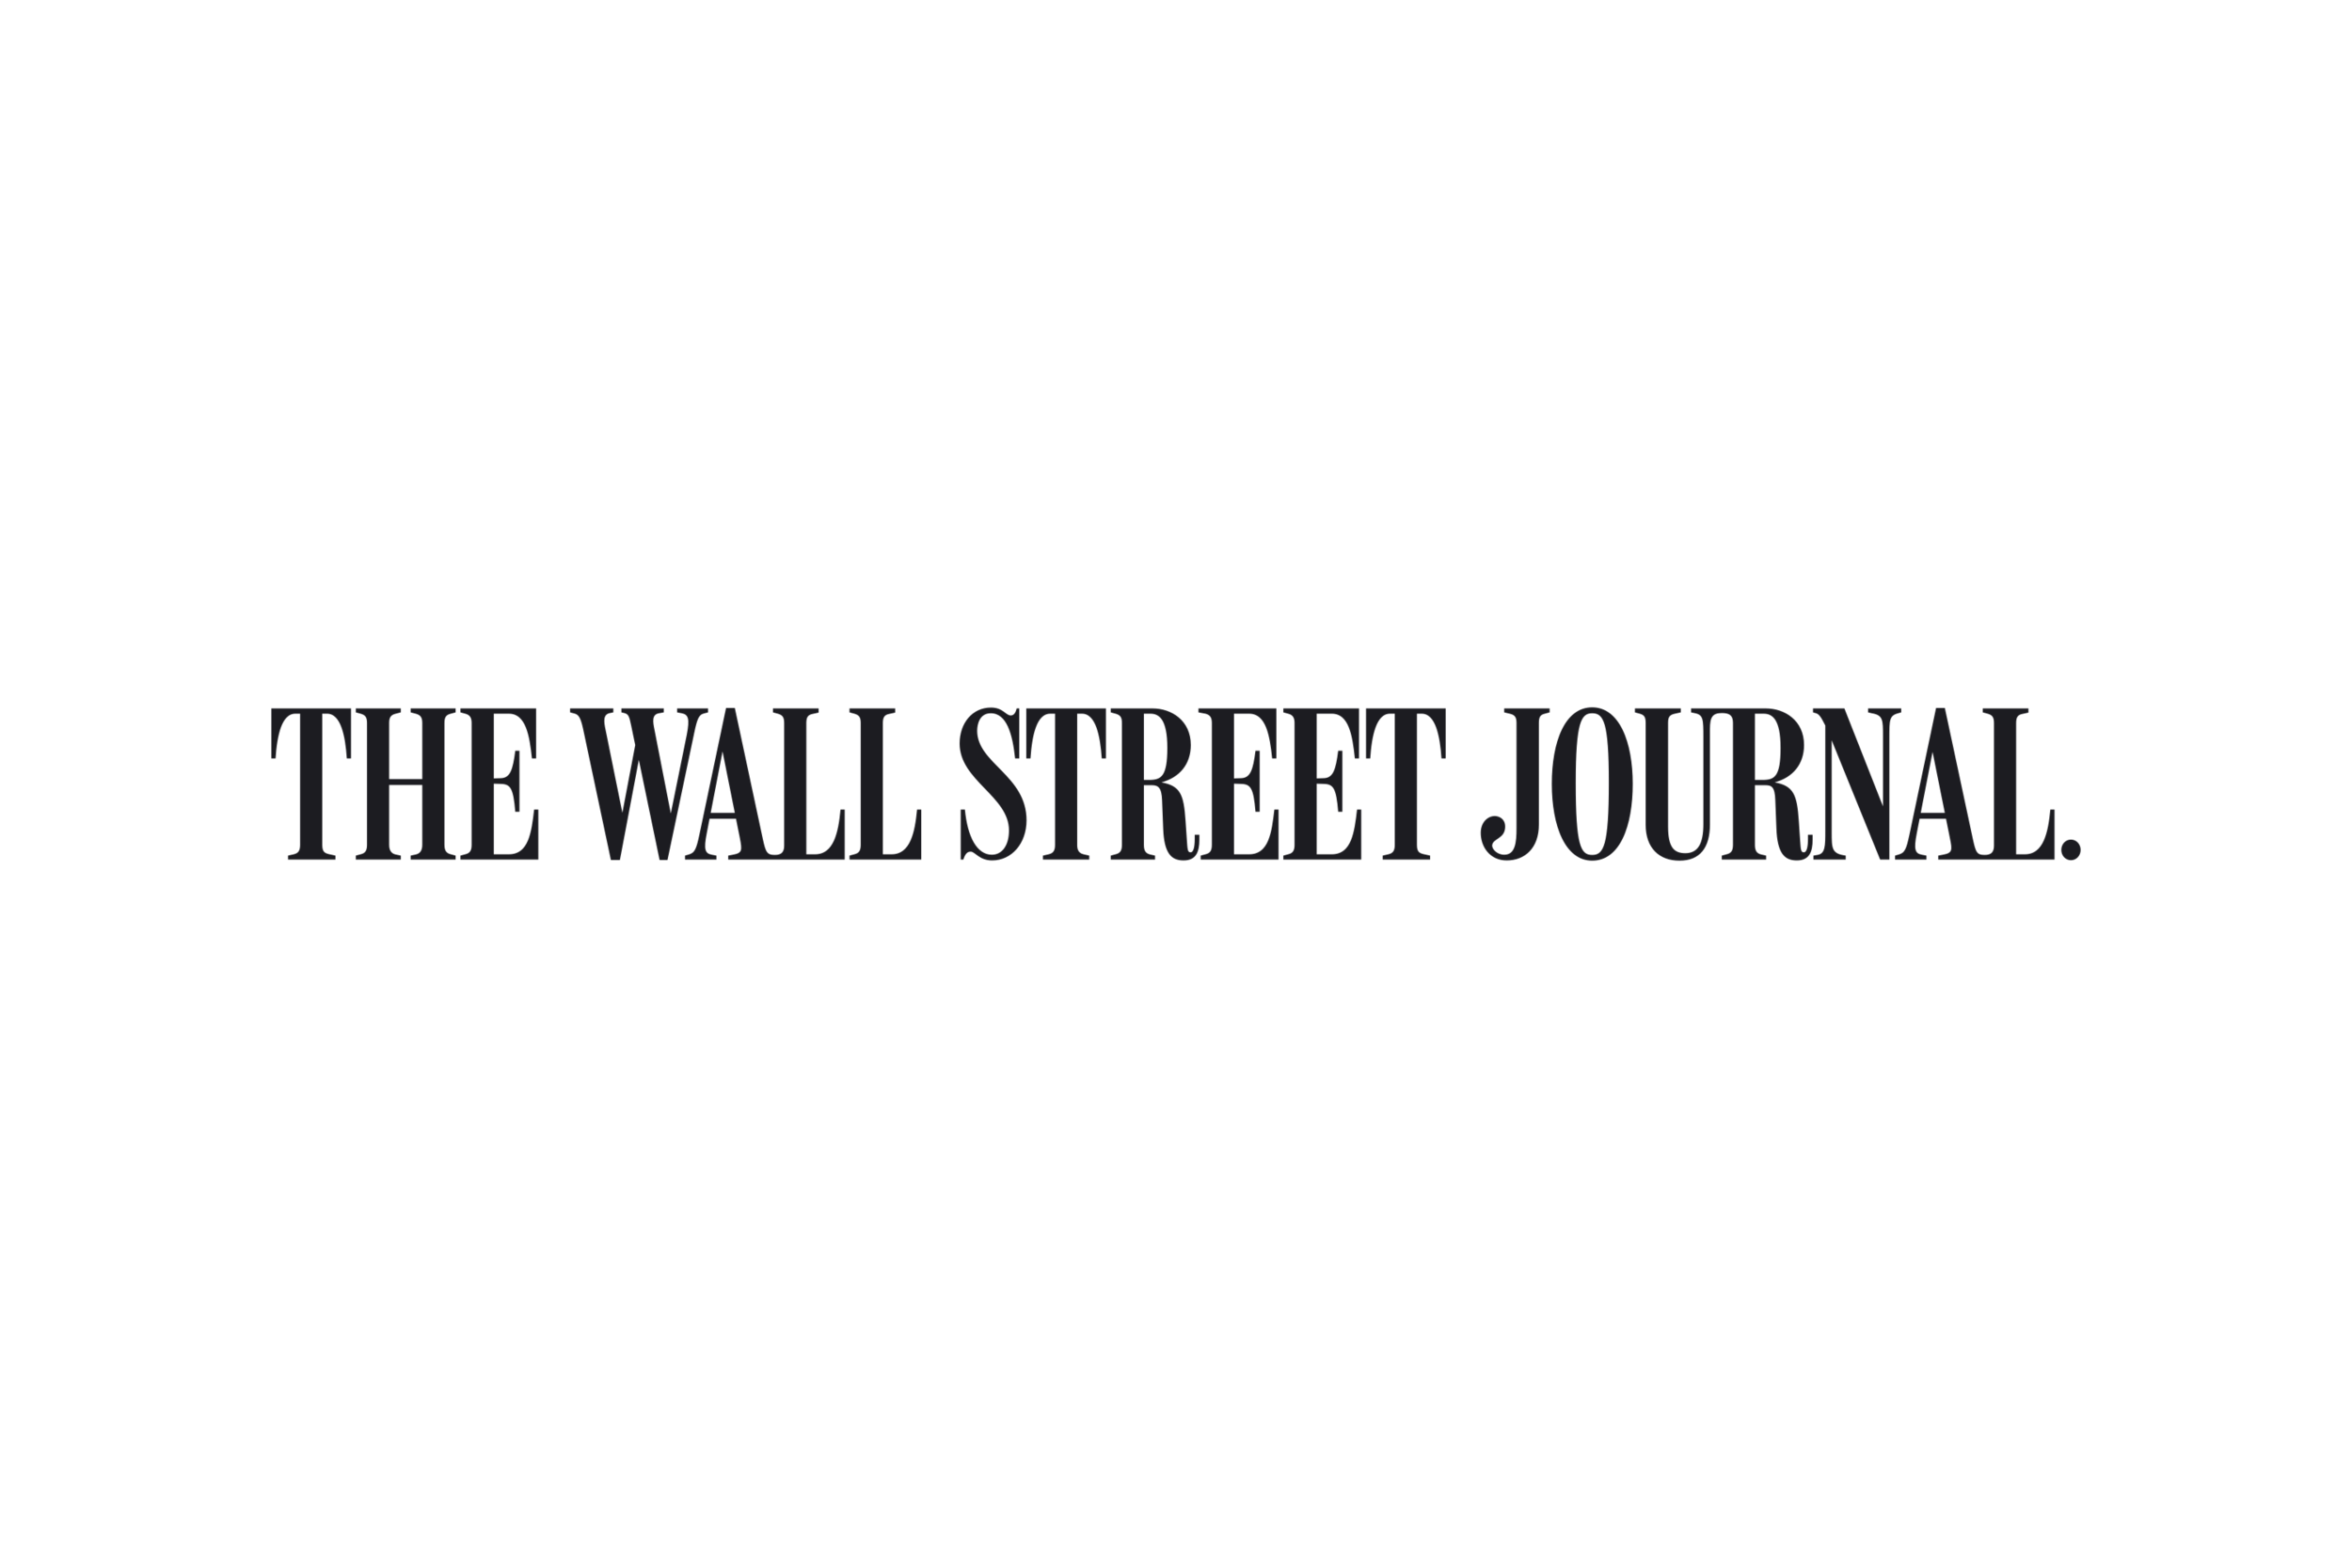 The_Wall_Street_Journal-Logo.wine.png